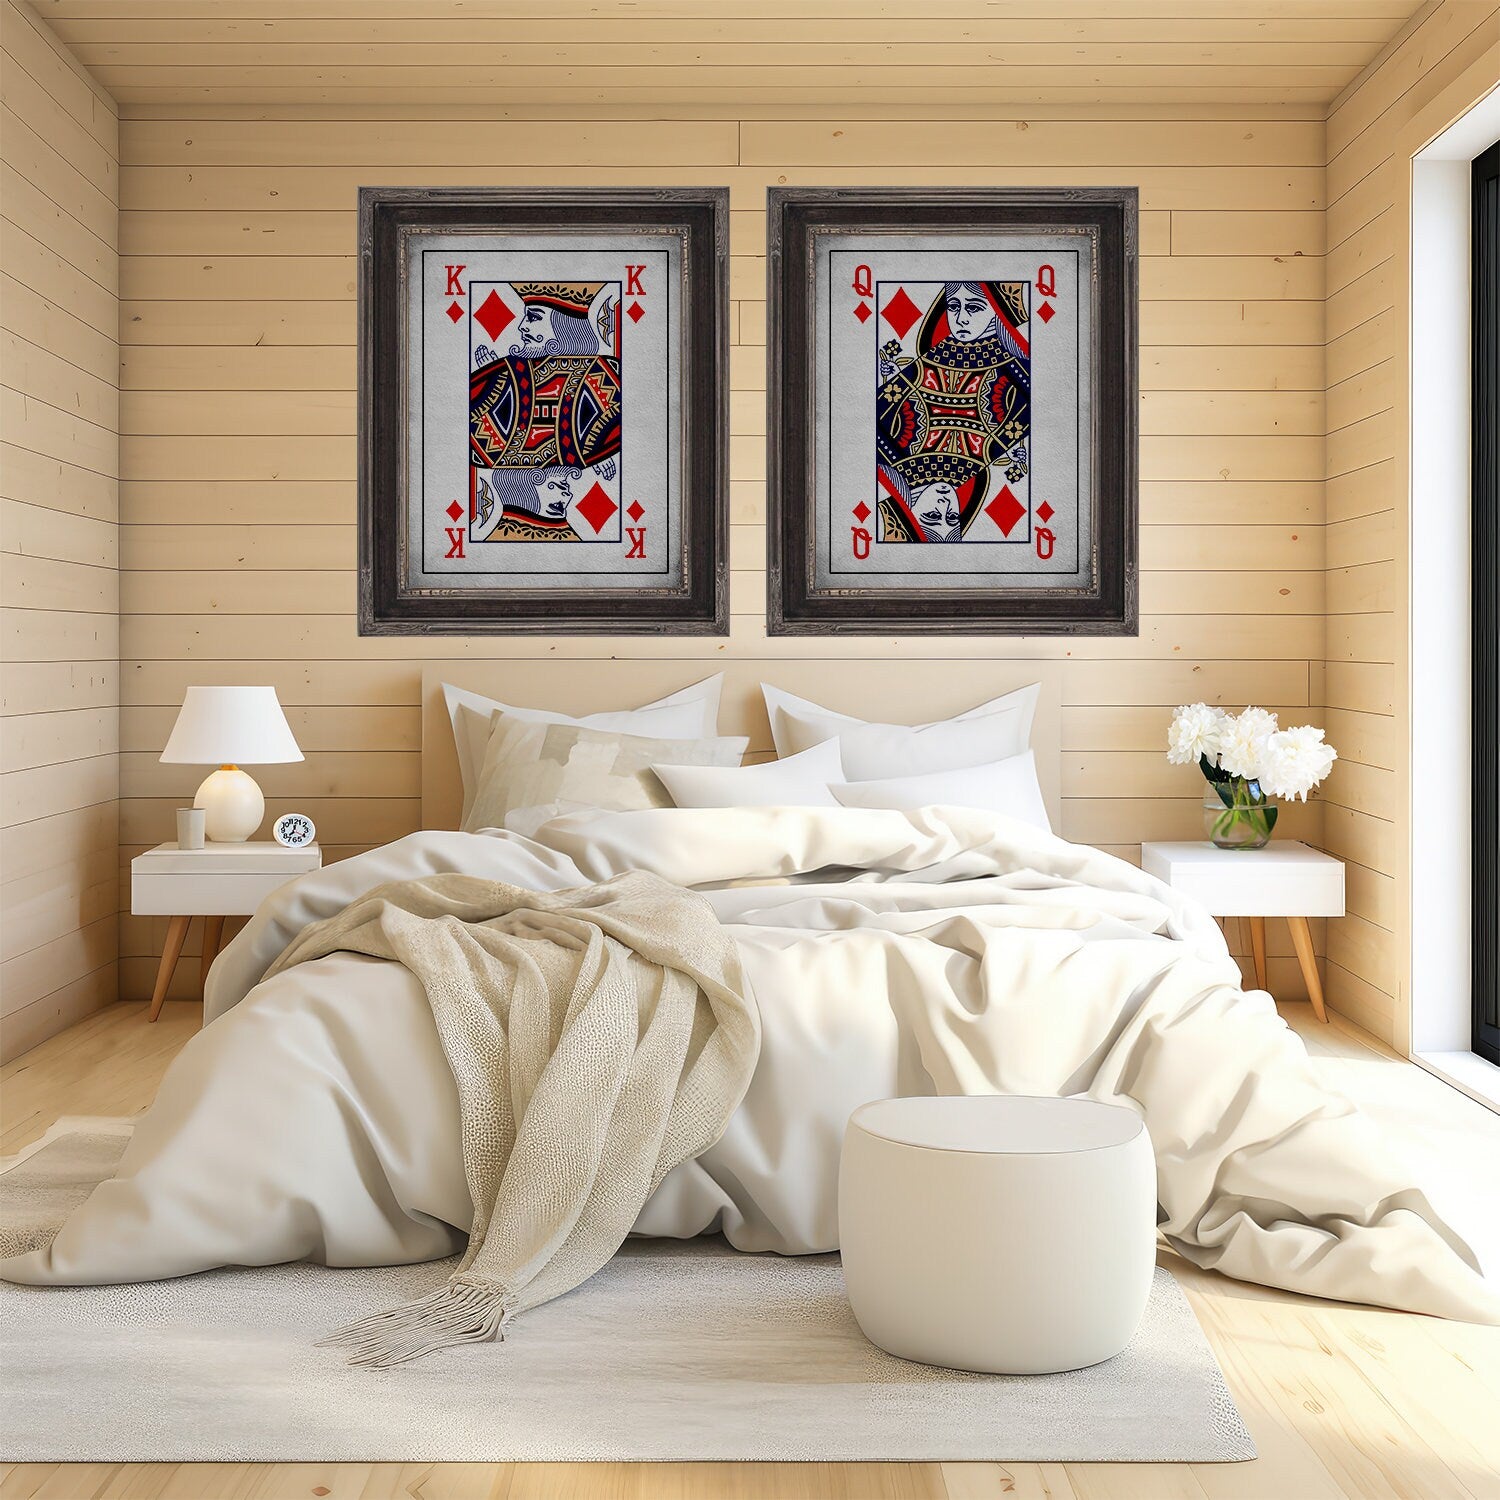 King & Queen of Diamonds Playing Card Art Prints - Rustic Poker Card Posters at Adirondack Retro